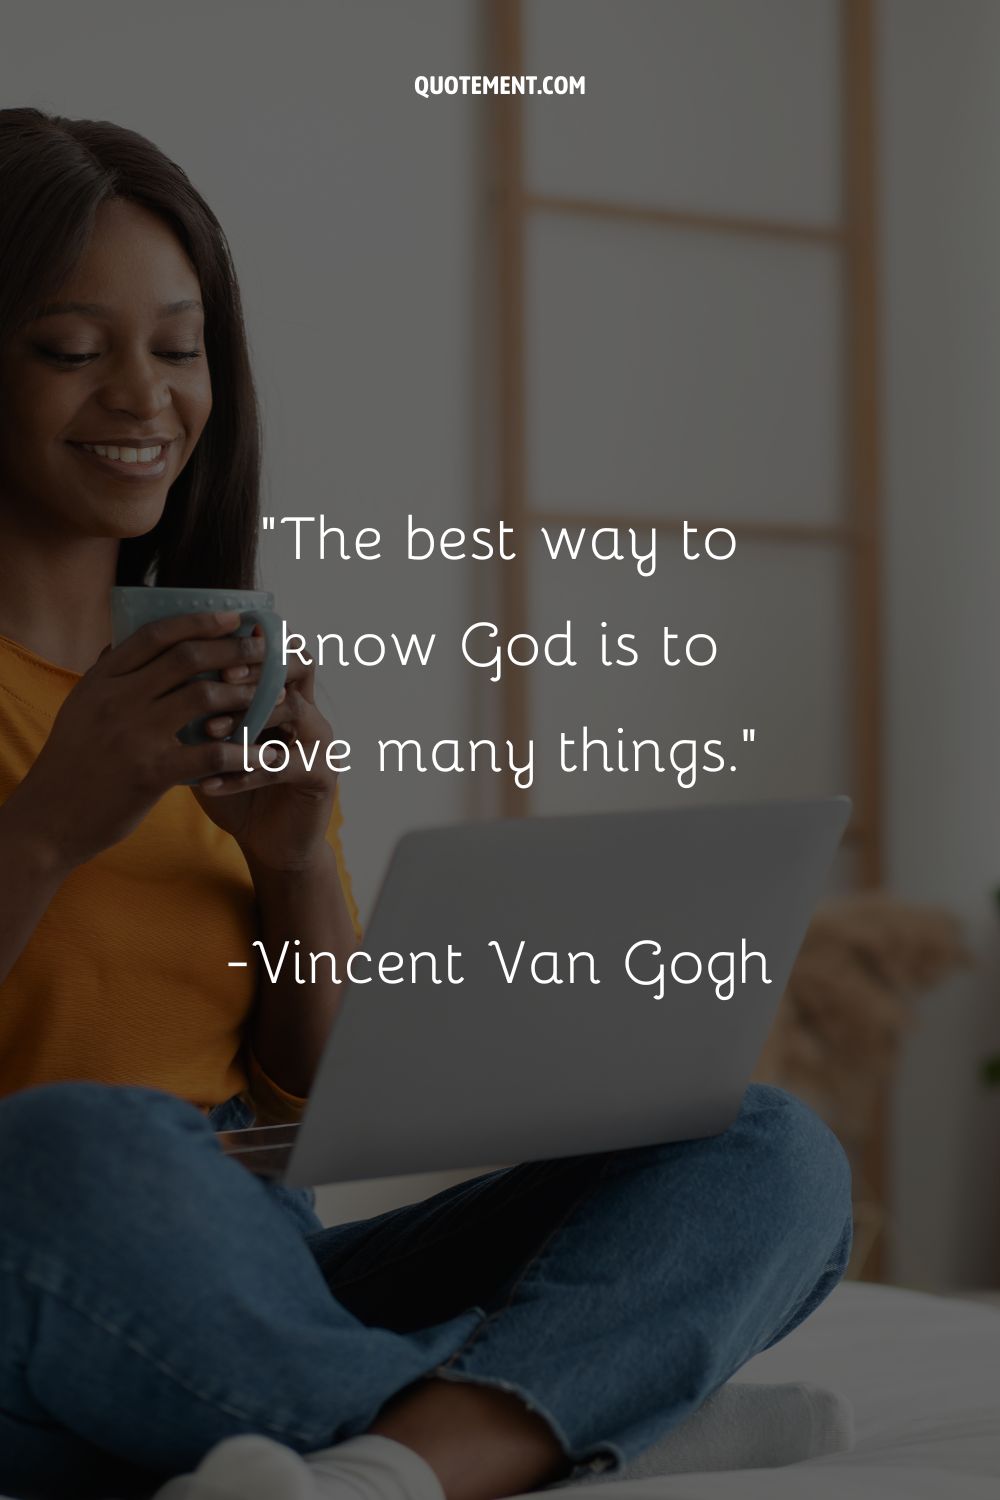 The best way to know God is to love many things